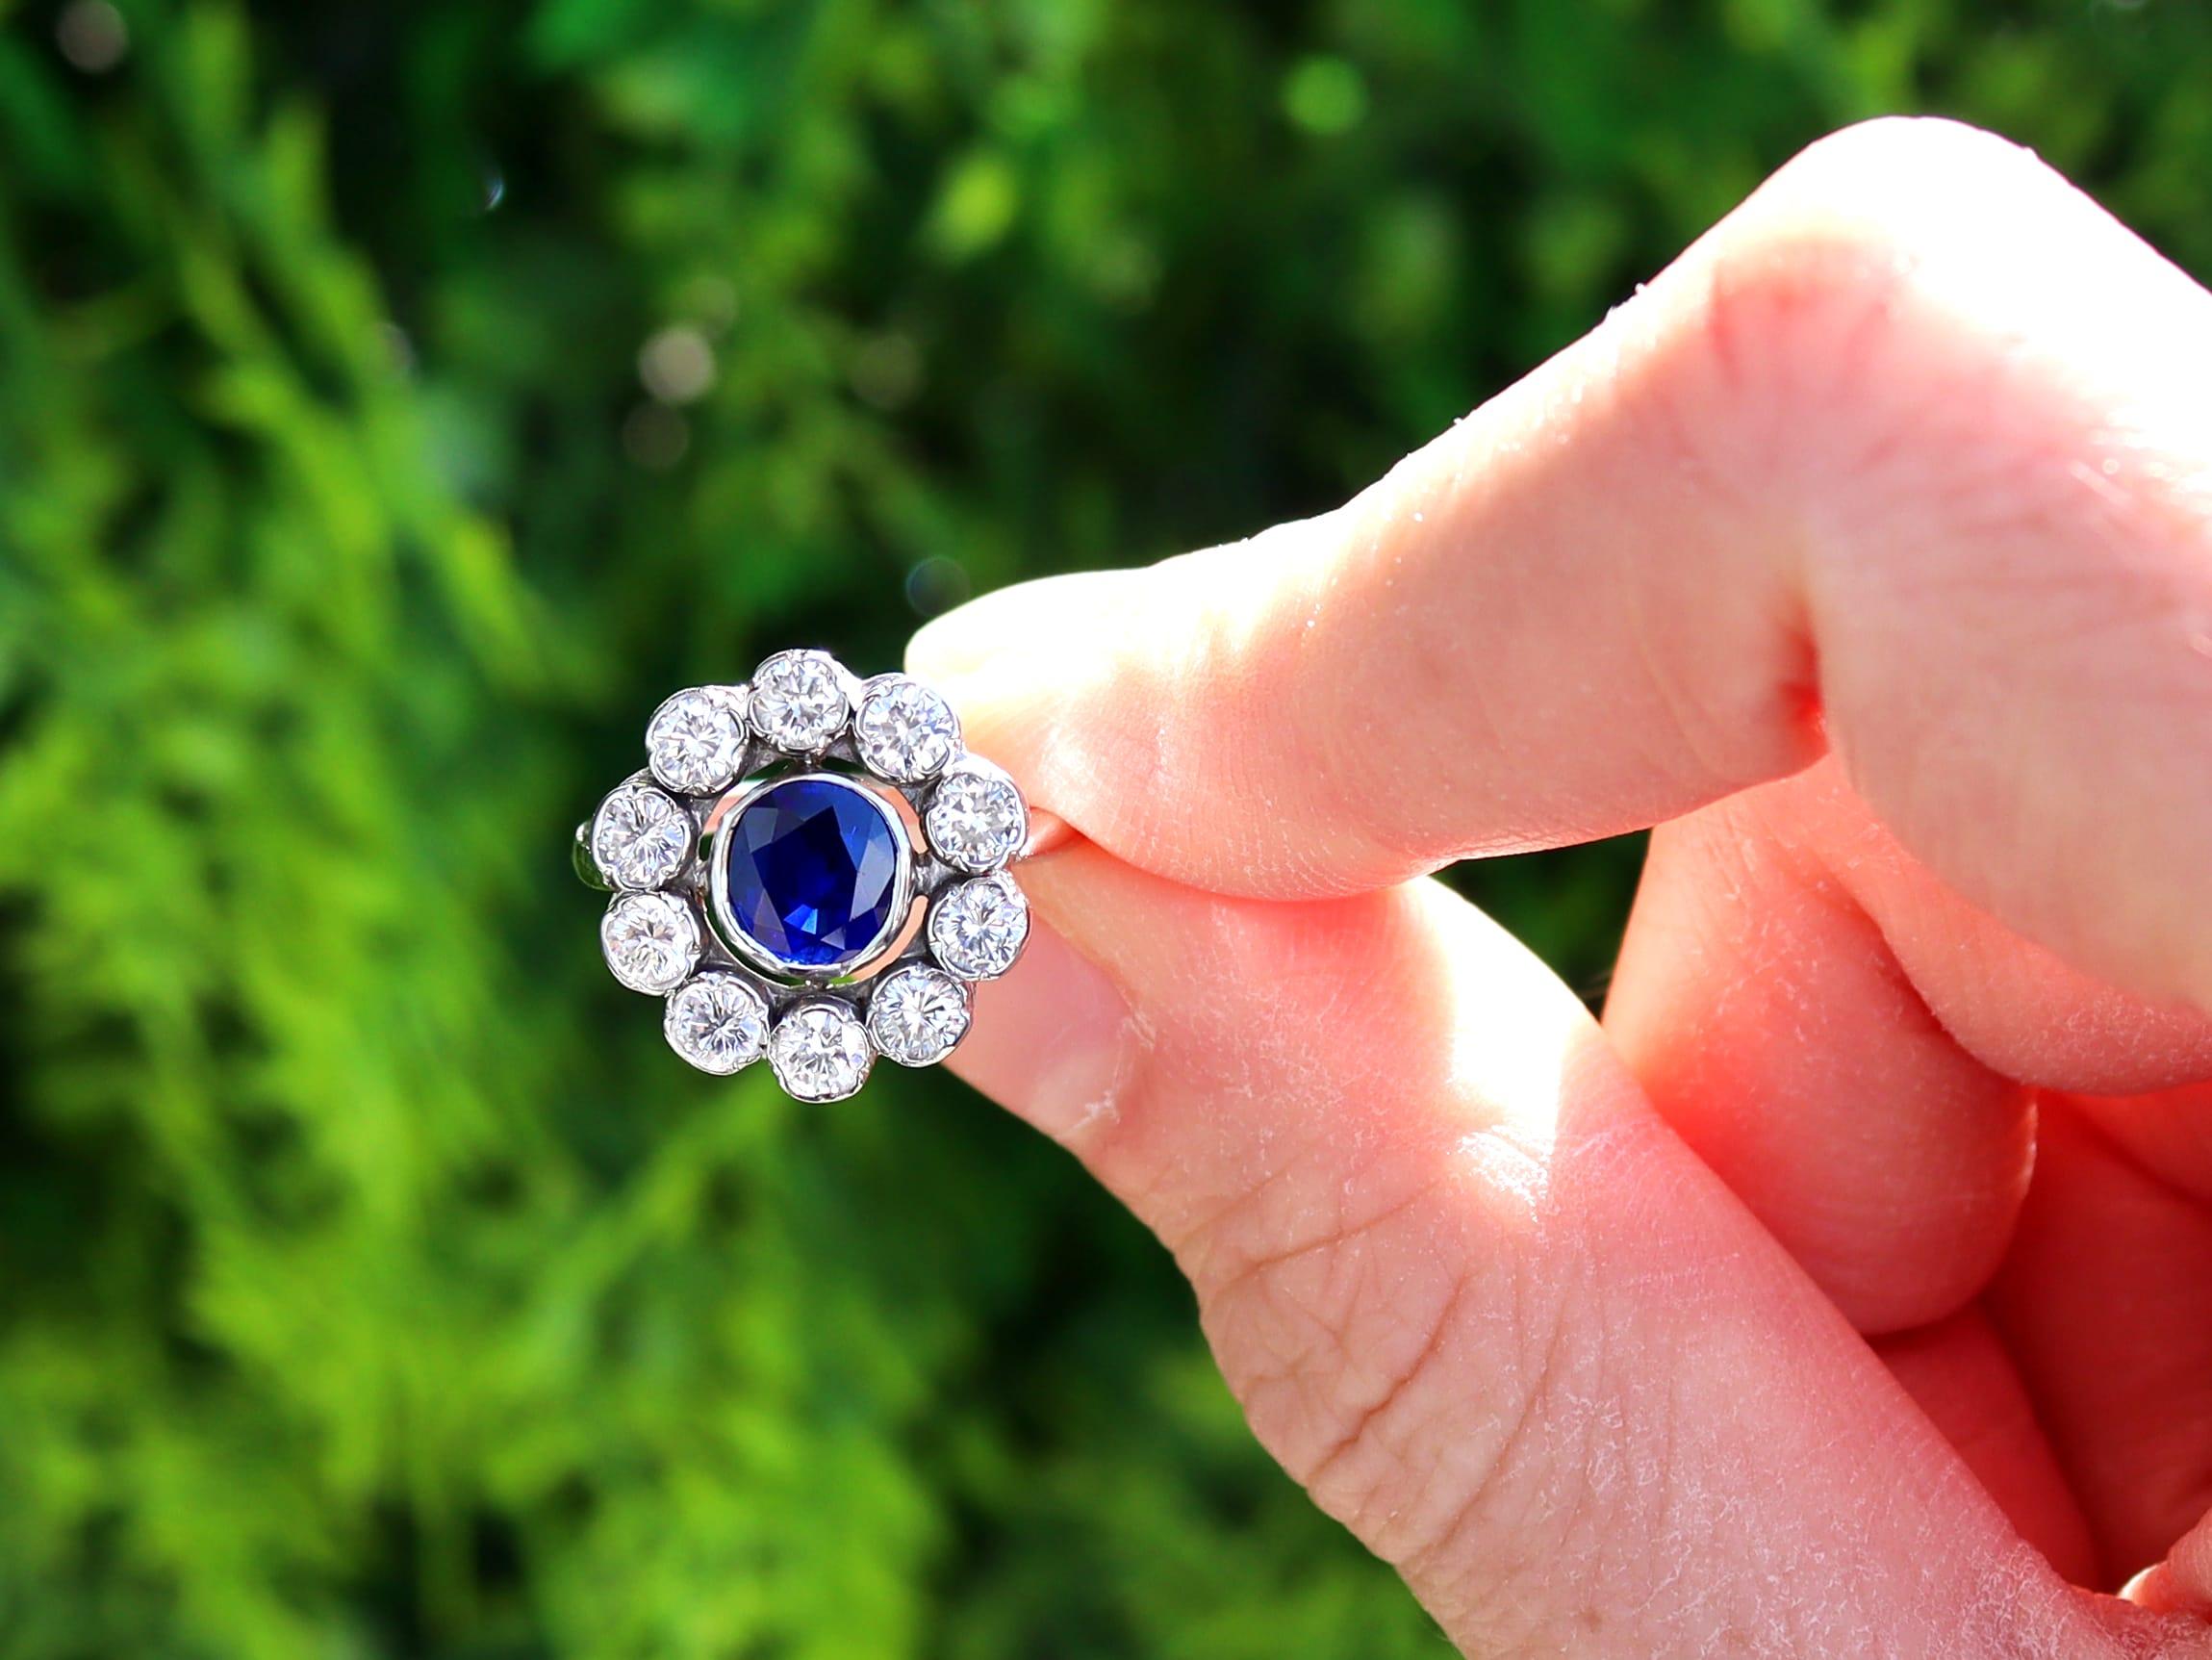 A stunning, fine and impressive 0.82 carat natural blue sapphire and 0.65 carat diamond (total), 18 karat white gold cluster ring; part of our vintage sapphire jewellery collections.

This stunning, fine and impressive vintage sapphire ring has been